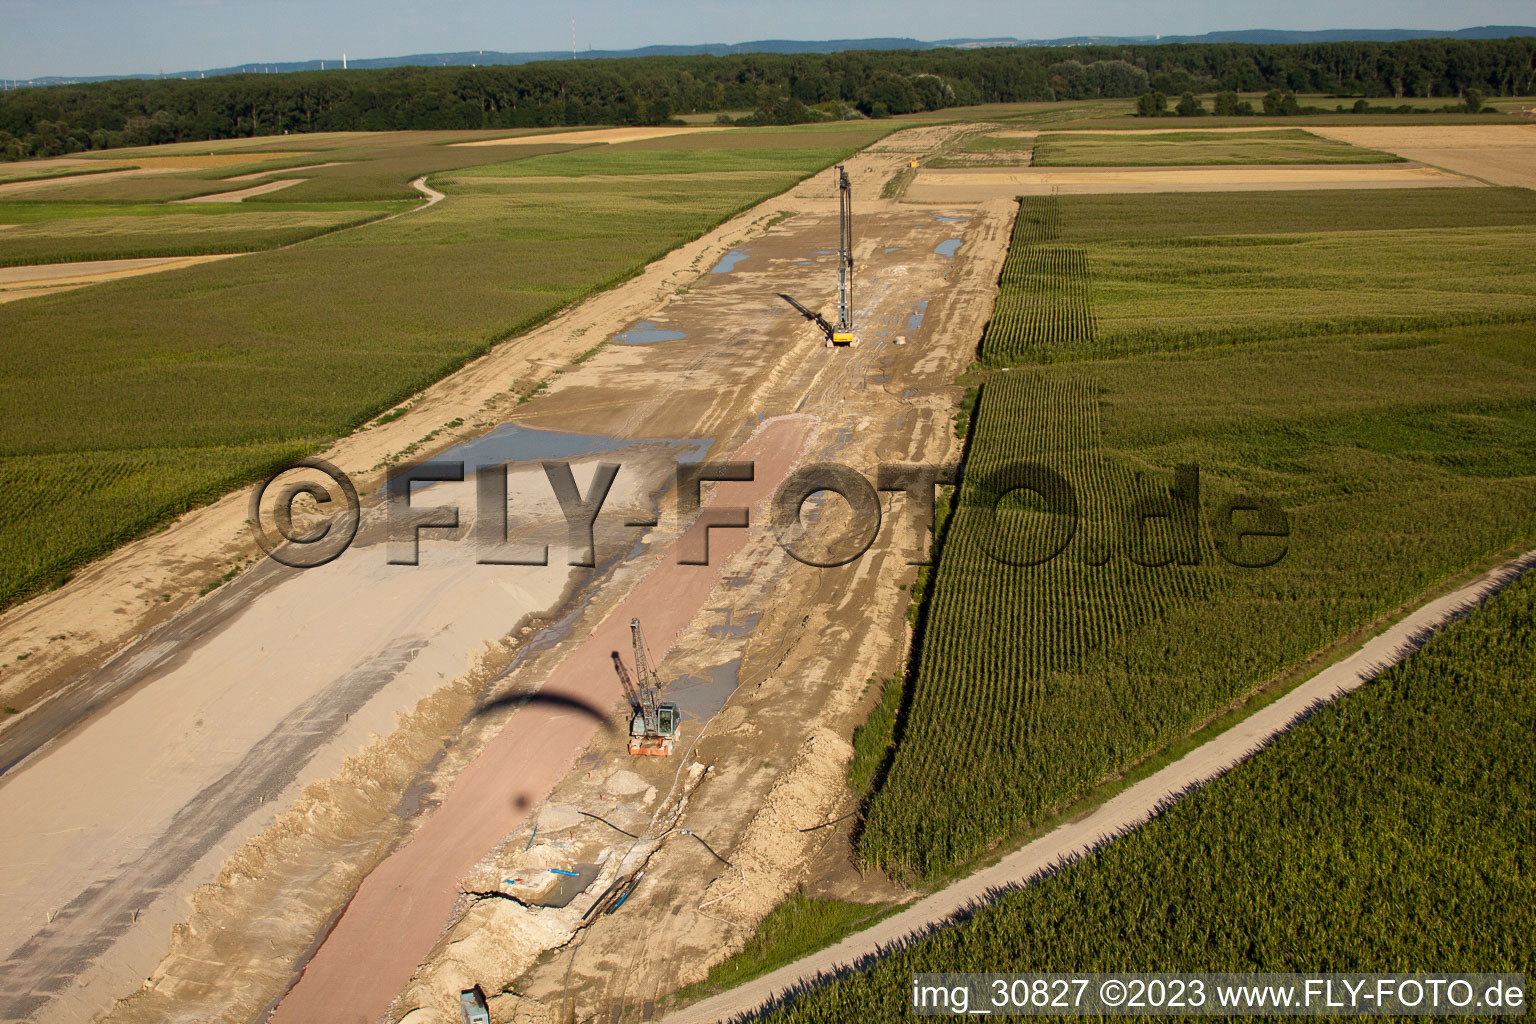 Polder construction in Neupotz in the state Rhineland-Palatinate, Germany seen from above